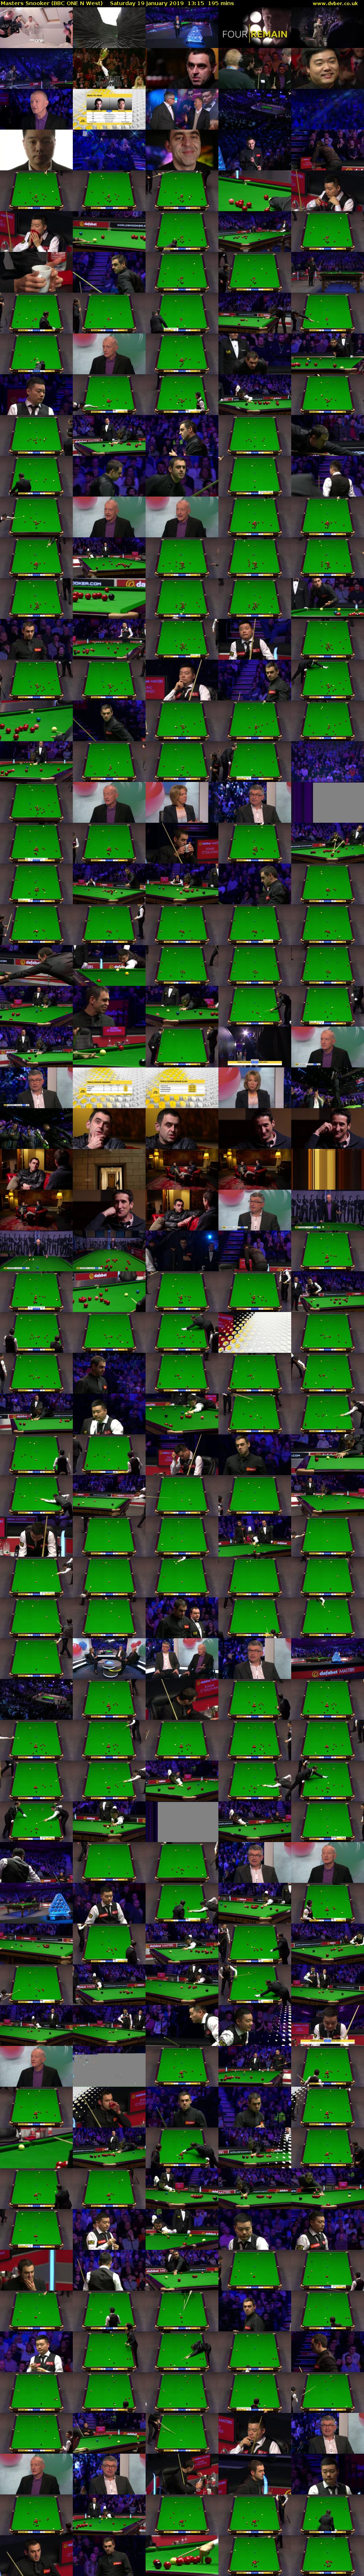 Masters Snooker (BBC ONE N West) Saturday 19 January 2019 13:15 - 16:30